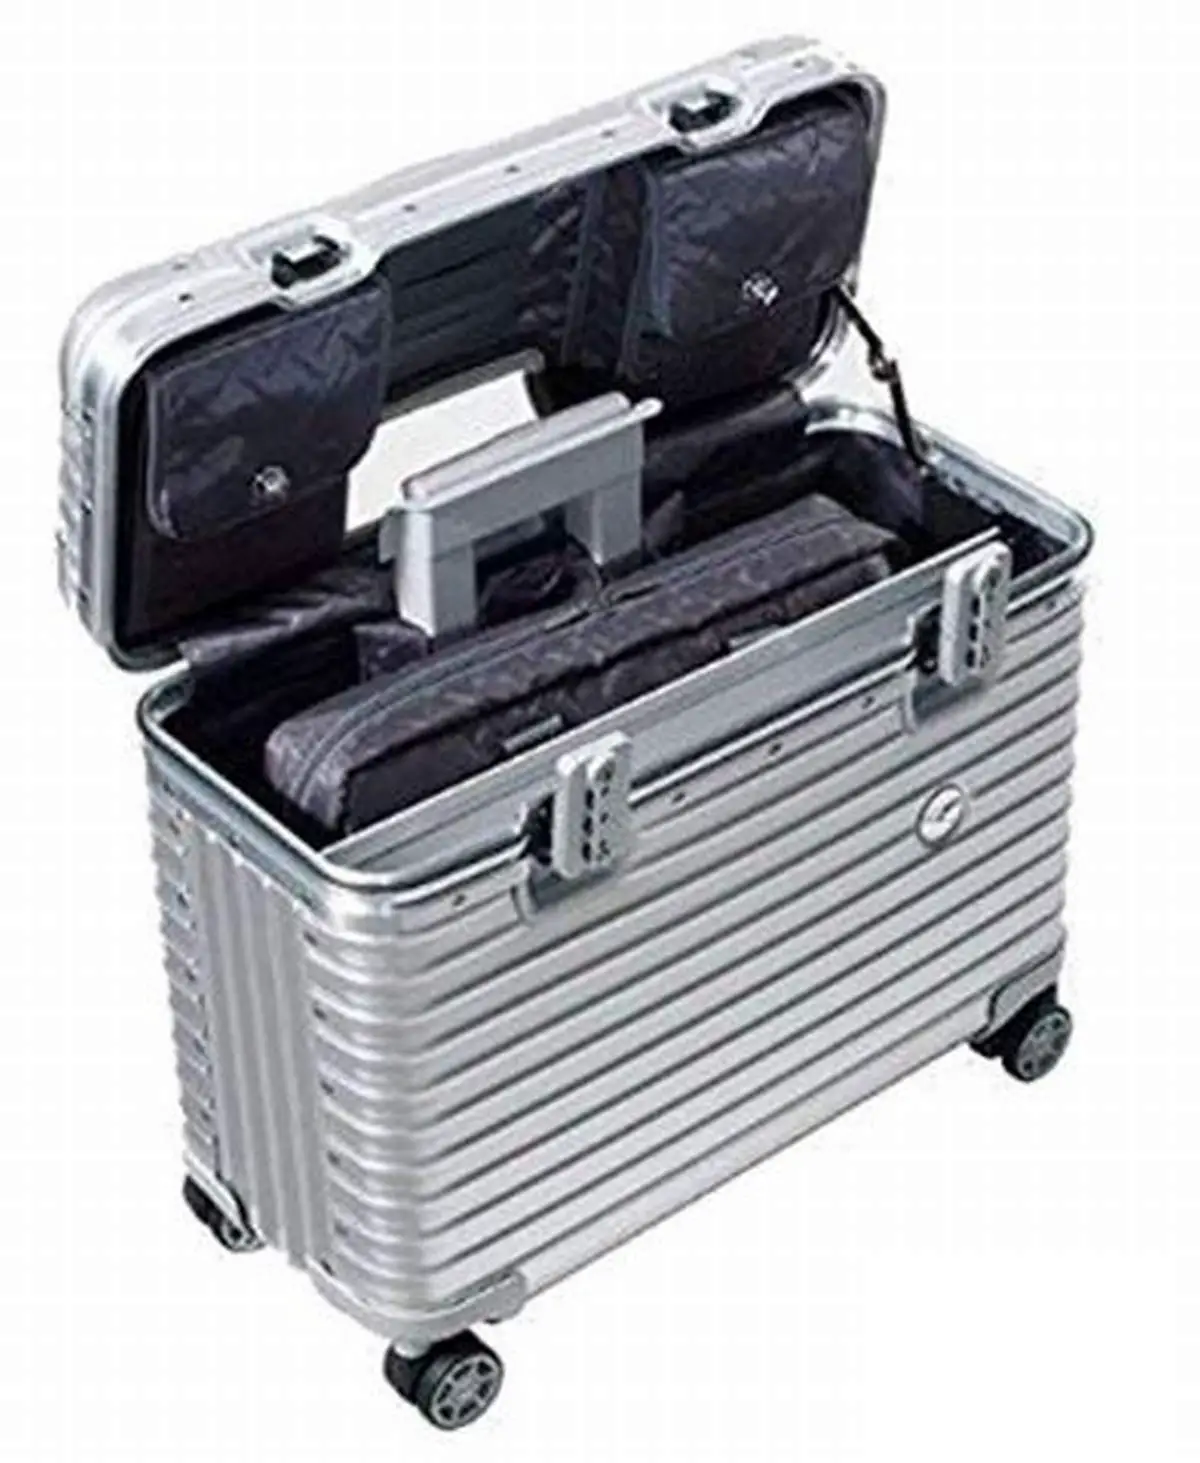 The Rimowa Pilot Case: Built for Adventure - Luggage Unpacked